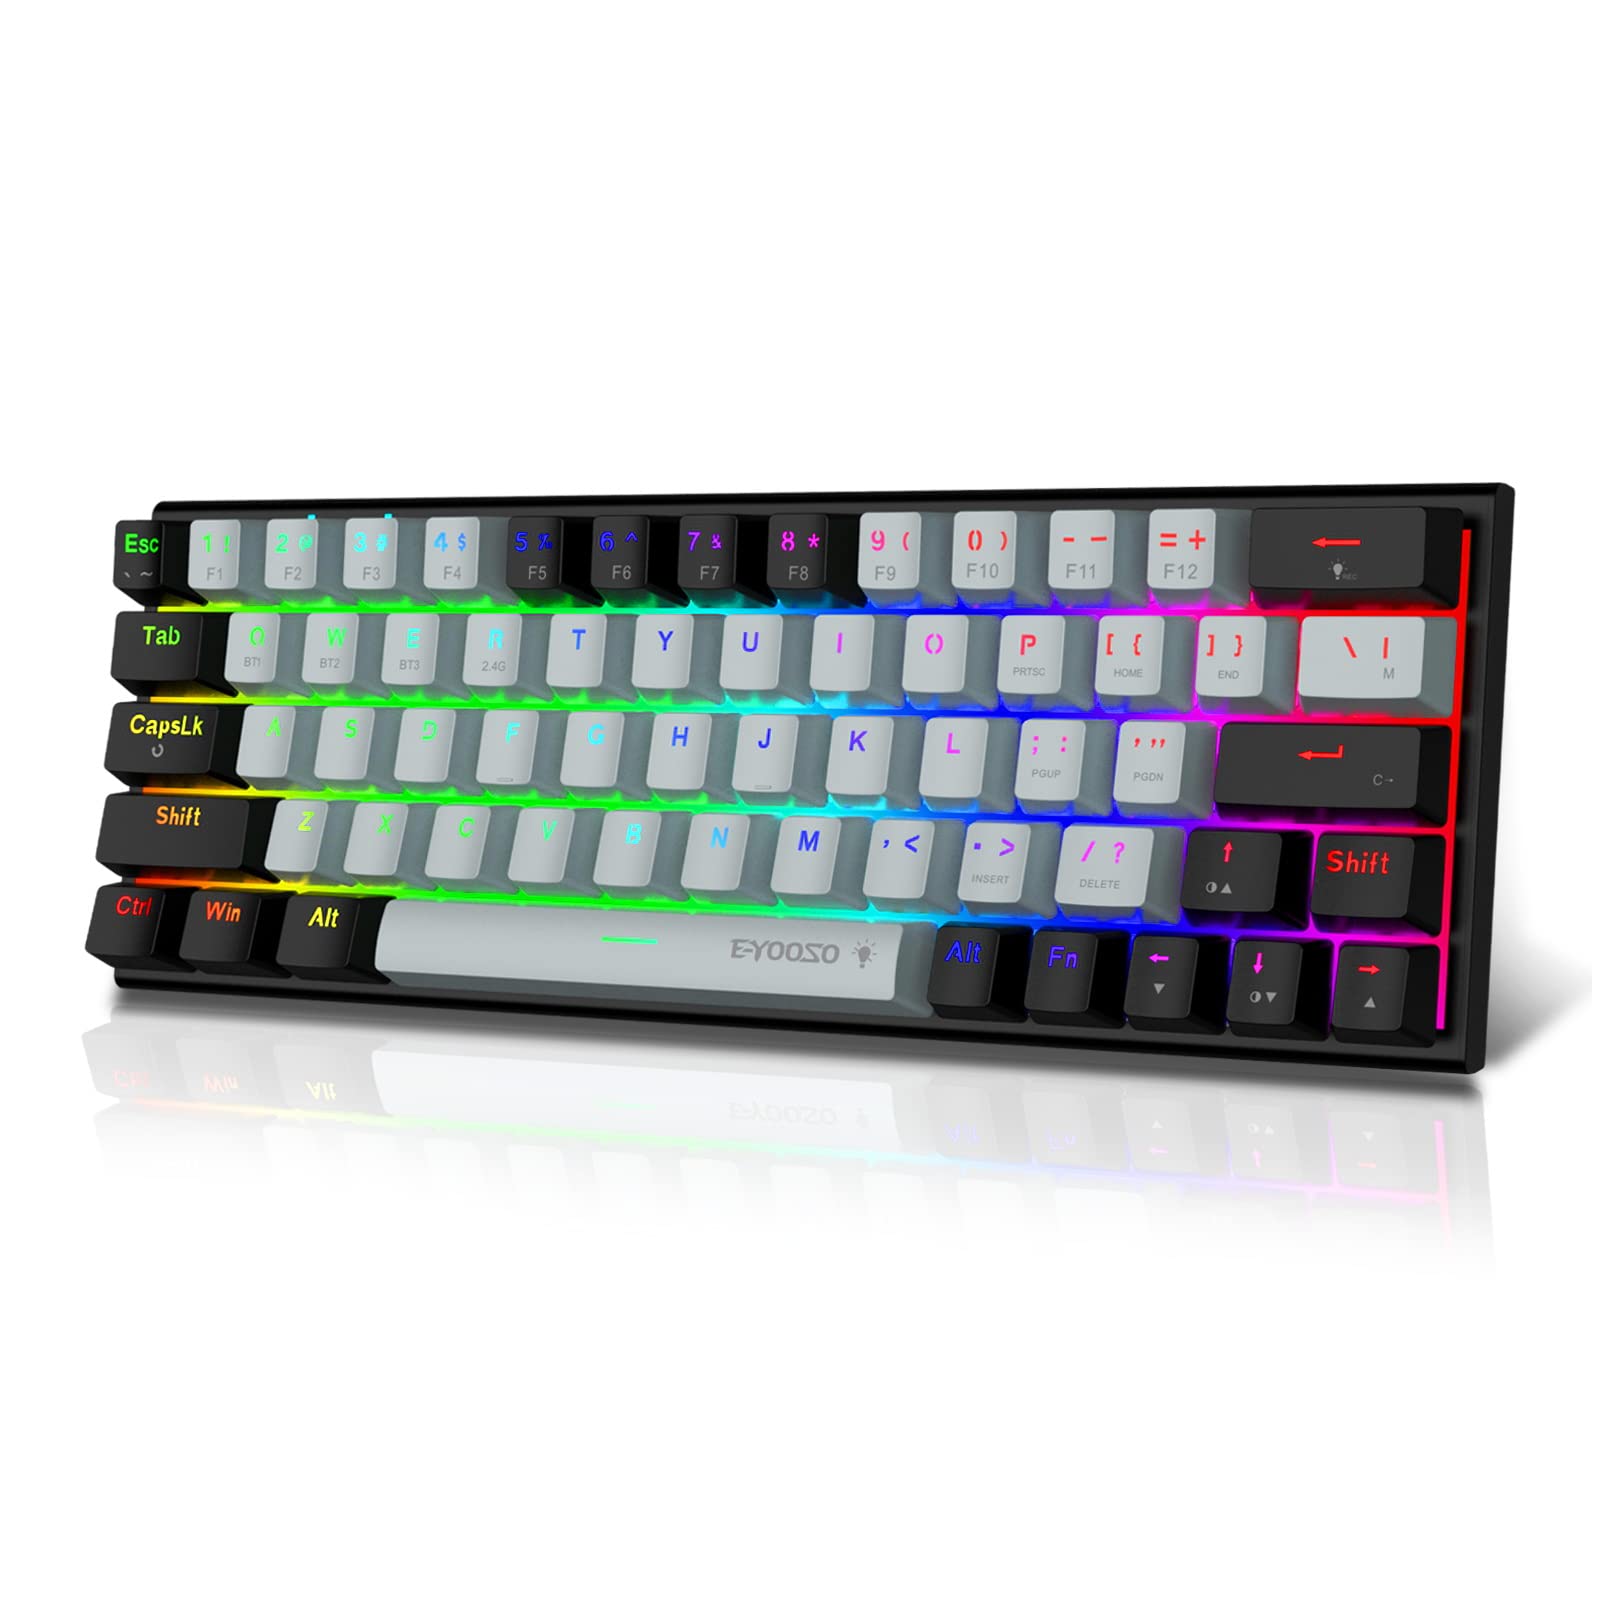 E-YOOSO Wireless Mechanical Keyboard, Bluetooth/2.4G/USB-C 60% Portable Rechargeable 63 Keys Gaming Keyboard, Compact RGB Hot Swappable Mechanical Keyboard with Linear Red Switches for Windows/Mac